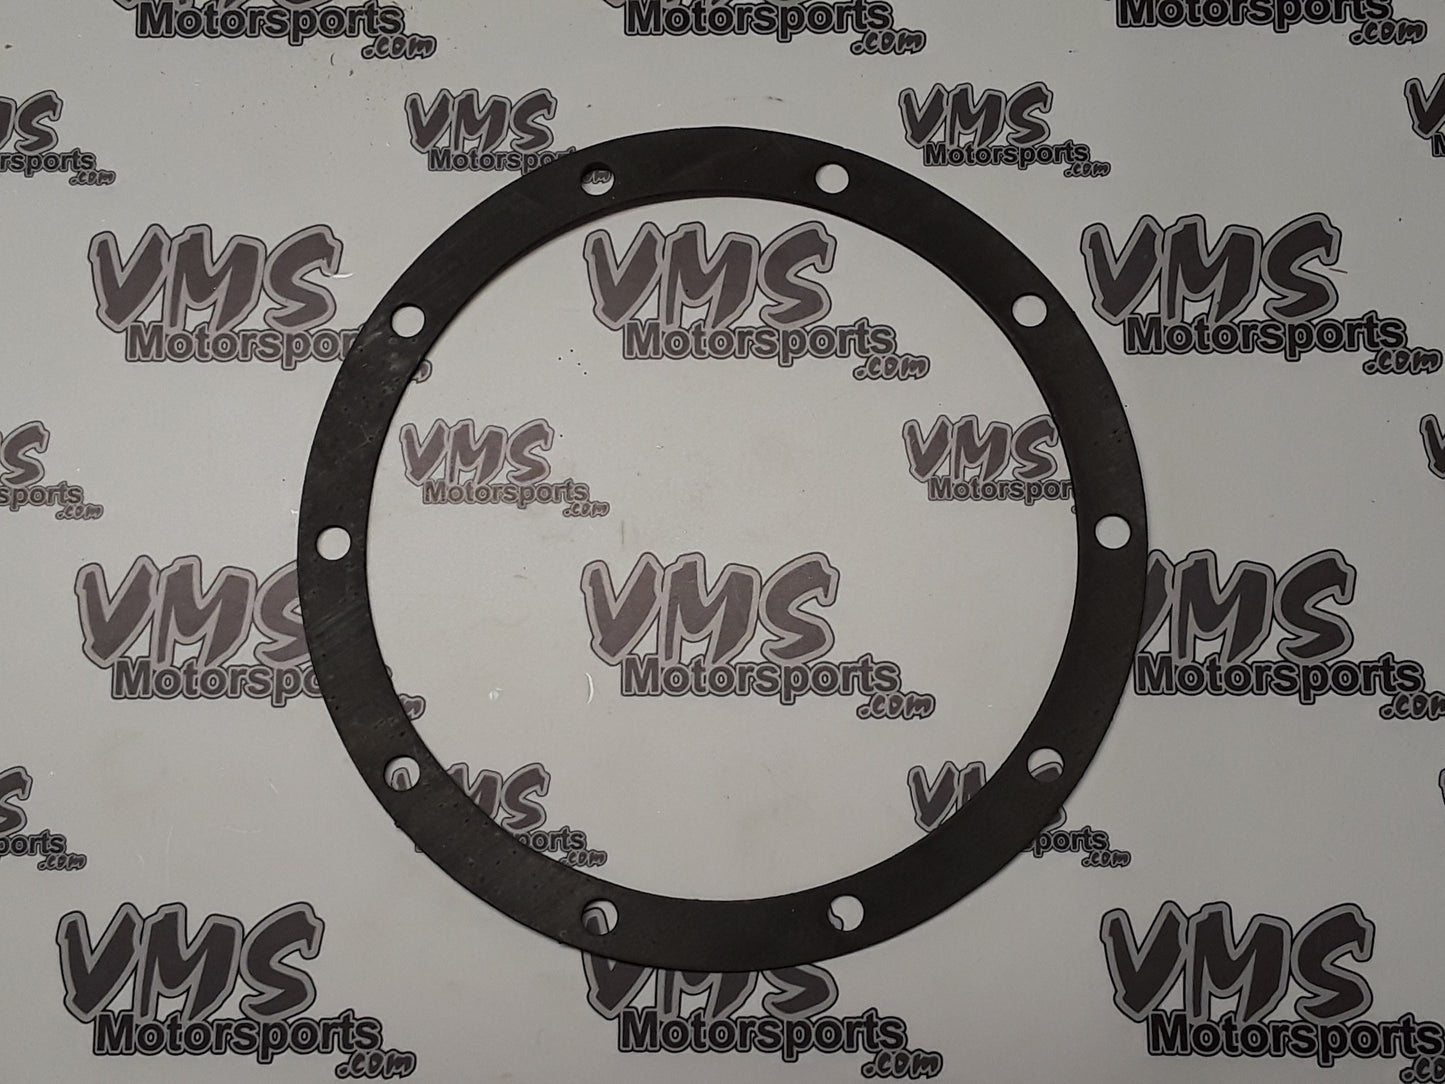 Legends Re-useable Center Section/Differential Gasket